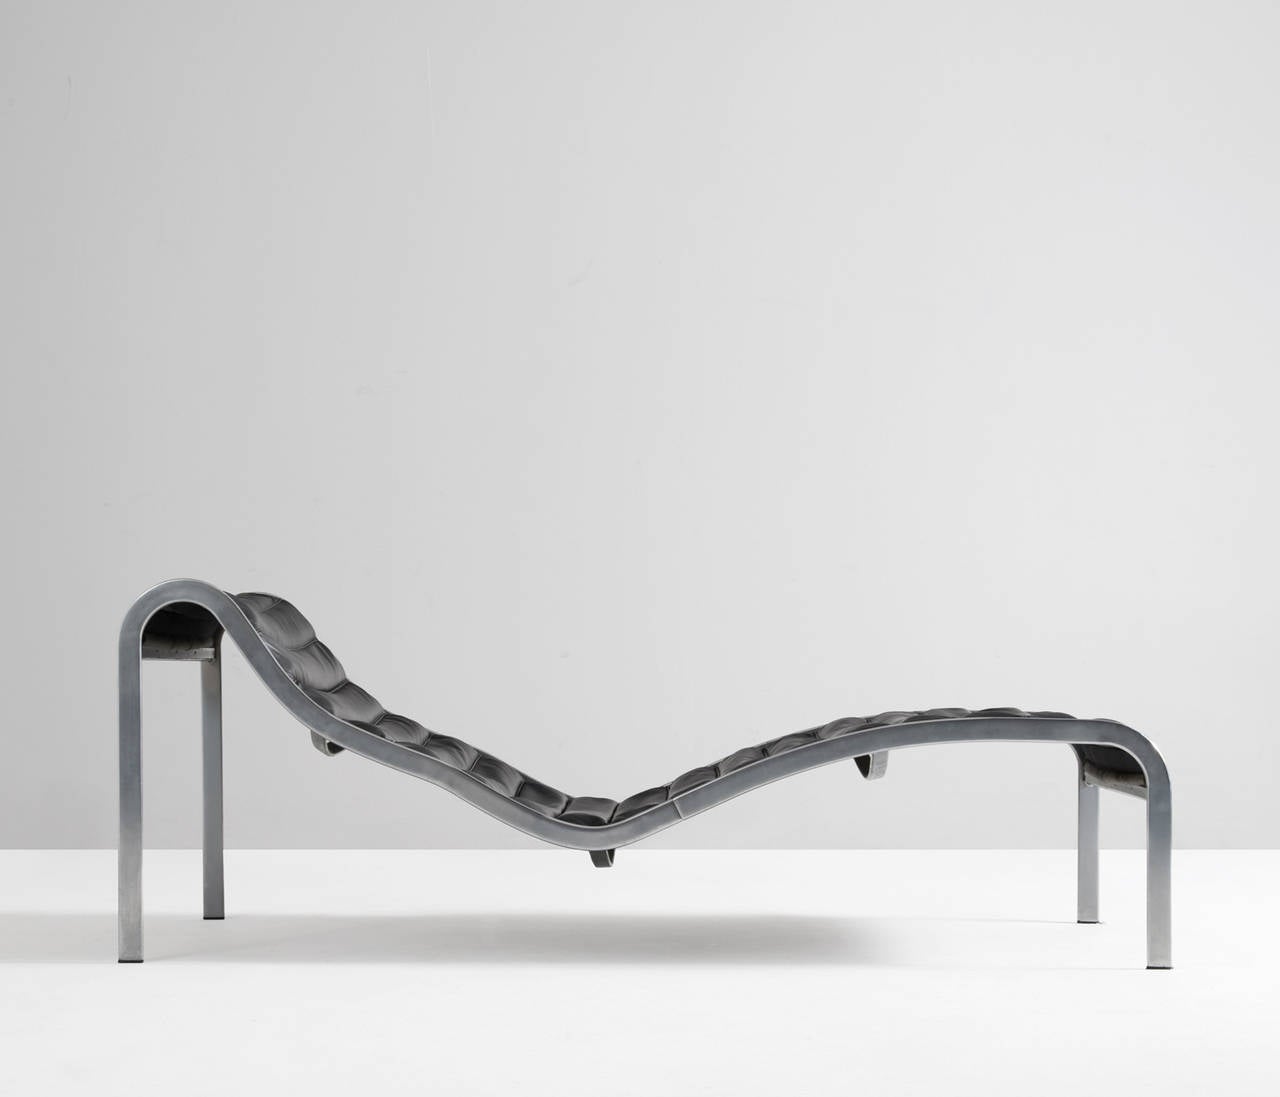 Sculptural designed chaise longue by Olivier Mourgue, France 1960s. 
Extremely rare model.

The bend chrome-plated steel frame is finished with black leather upholstery.
It is in a beautiful condition, the leather is nicely patinated.

High